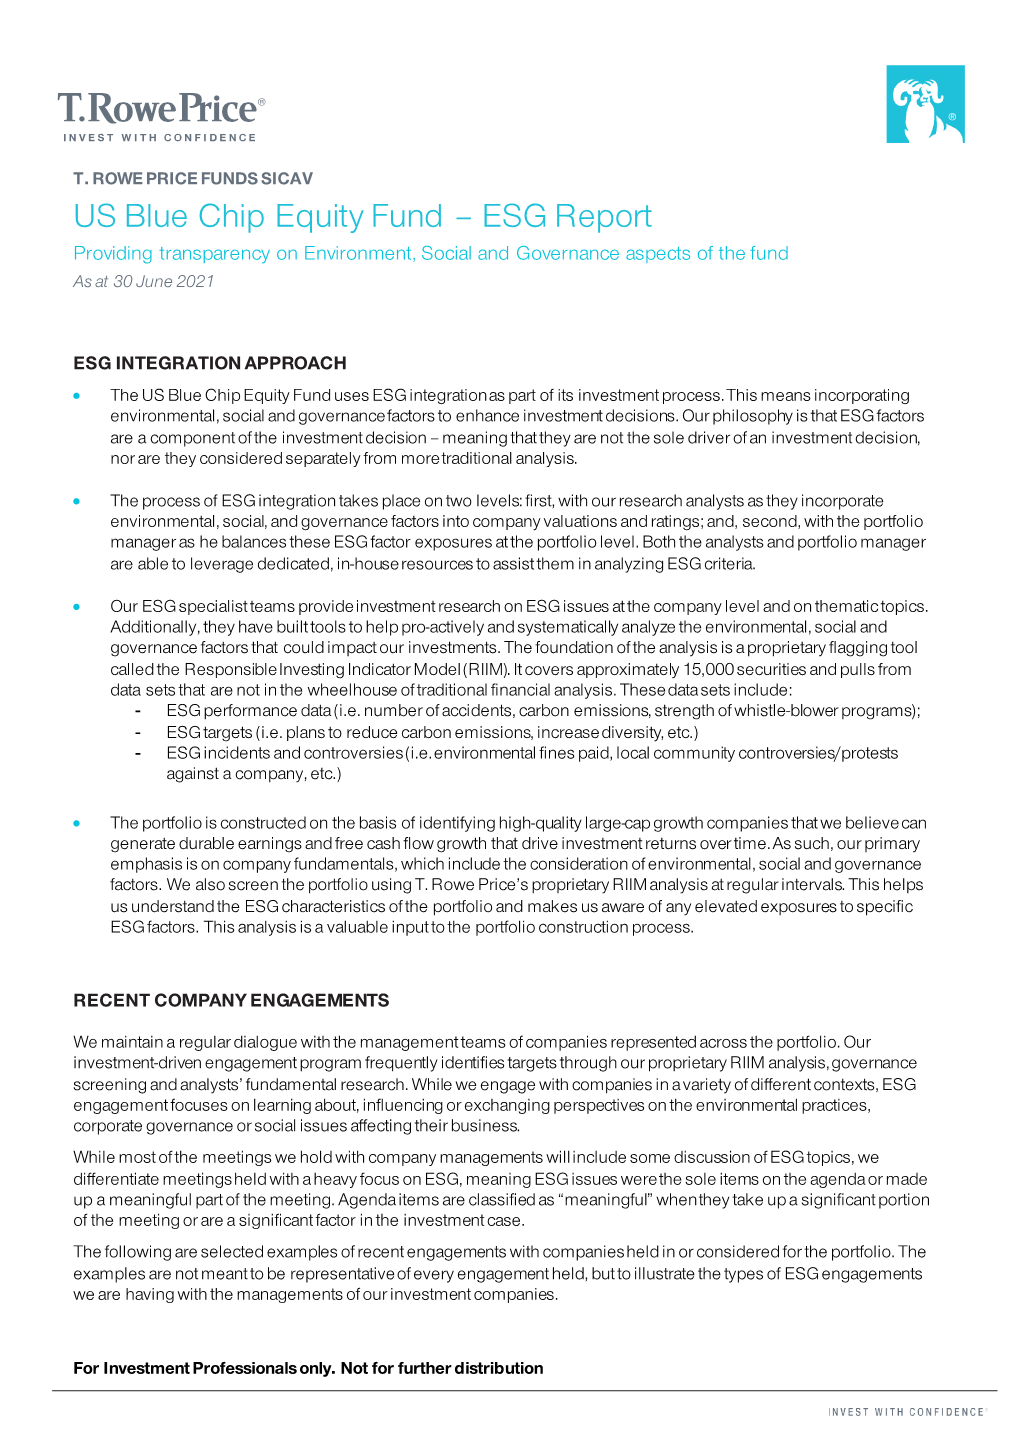 US Blue Chip Equity Fund – ESG Report Providing Transparency on Environment, Social and Governance Aspects of the Fund As at 30 June 2021